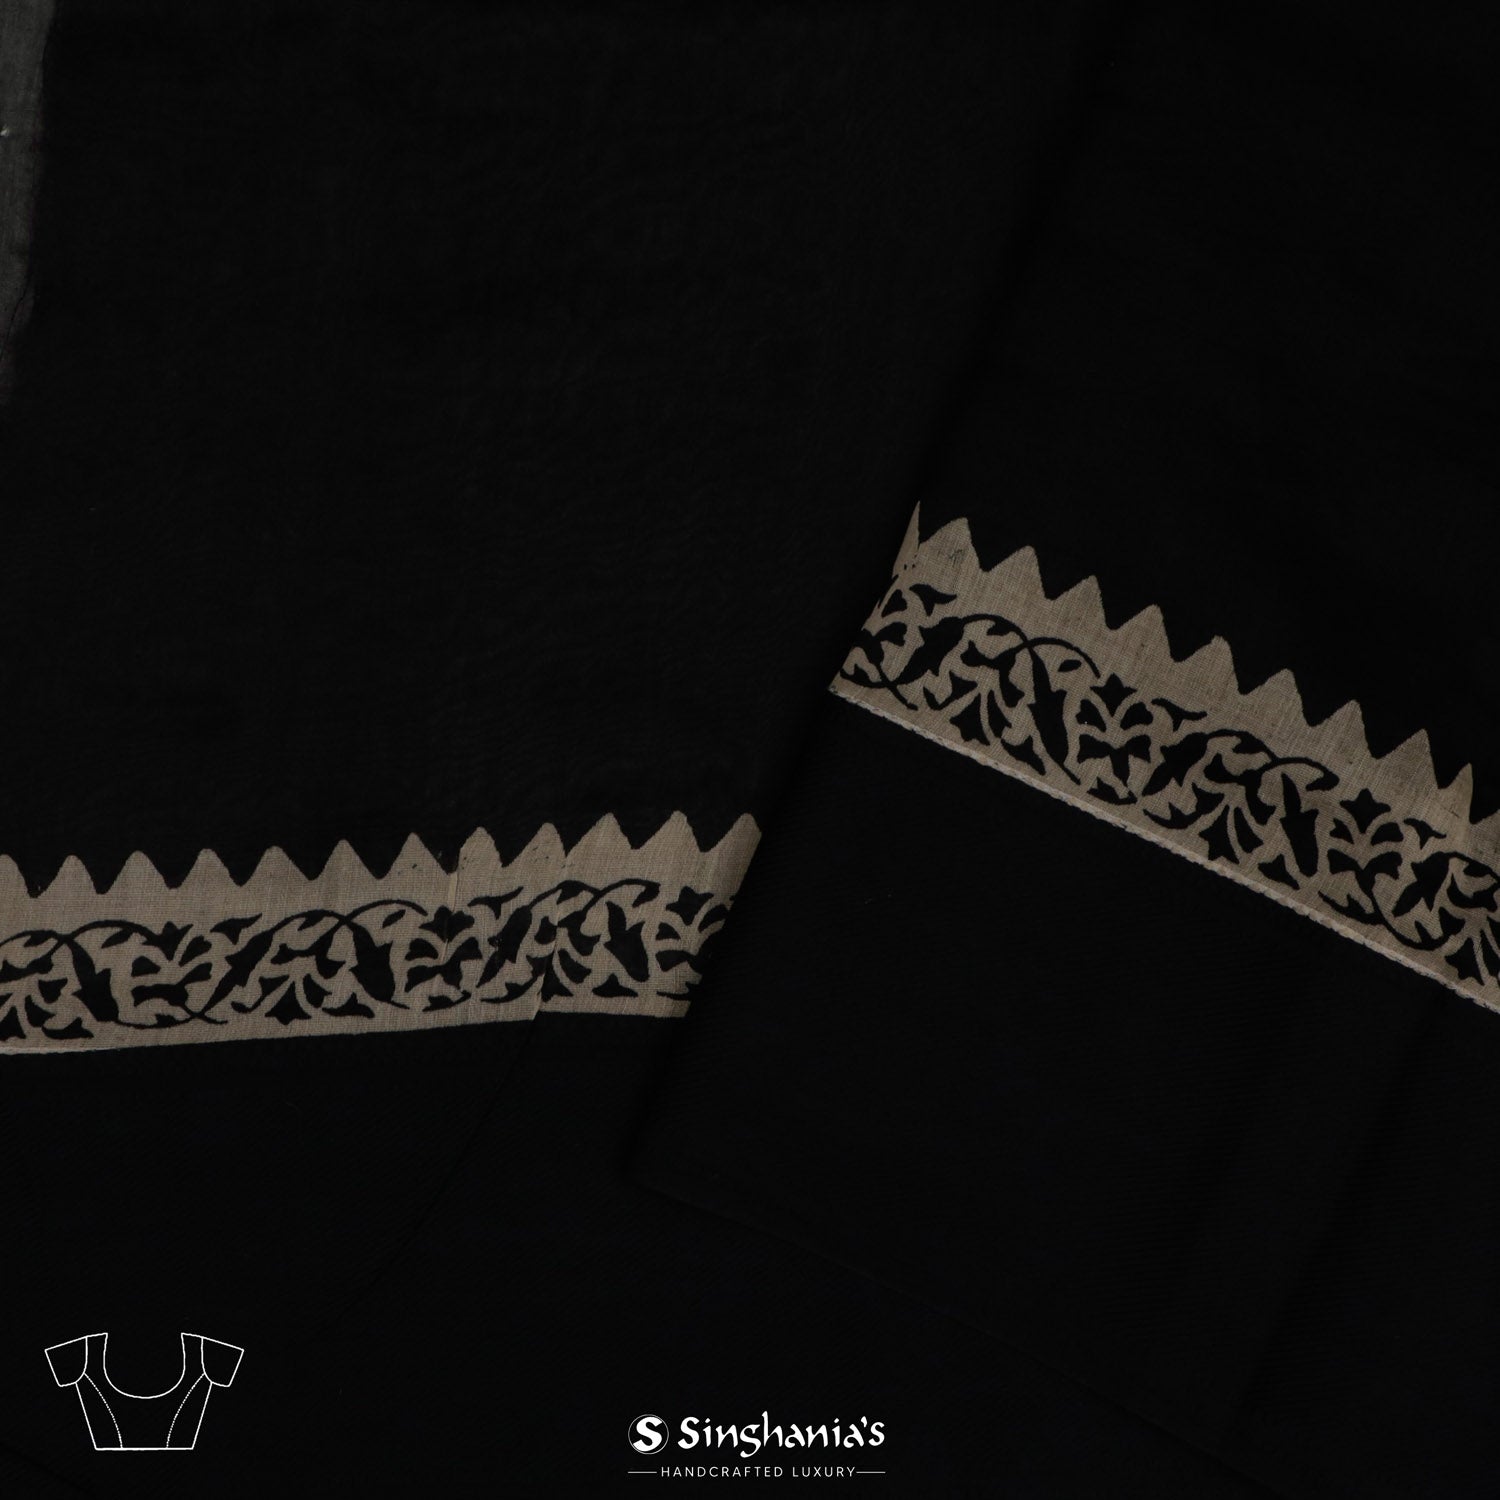 Pitch Black Printed Chanderi Saree With Different Geometrical Pattern